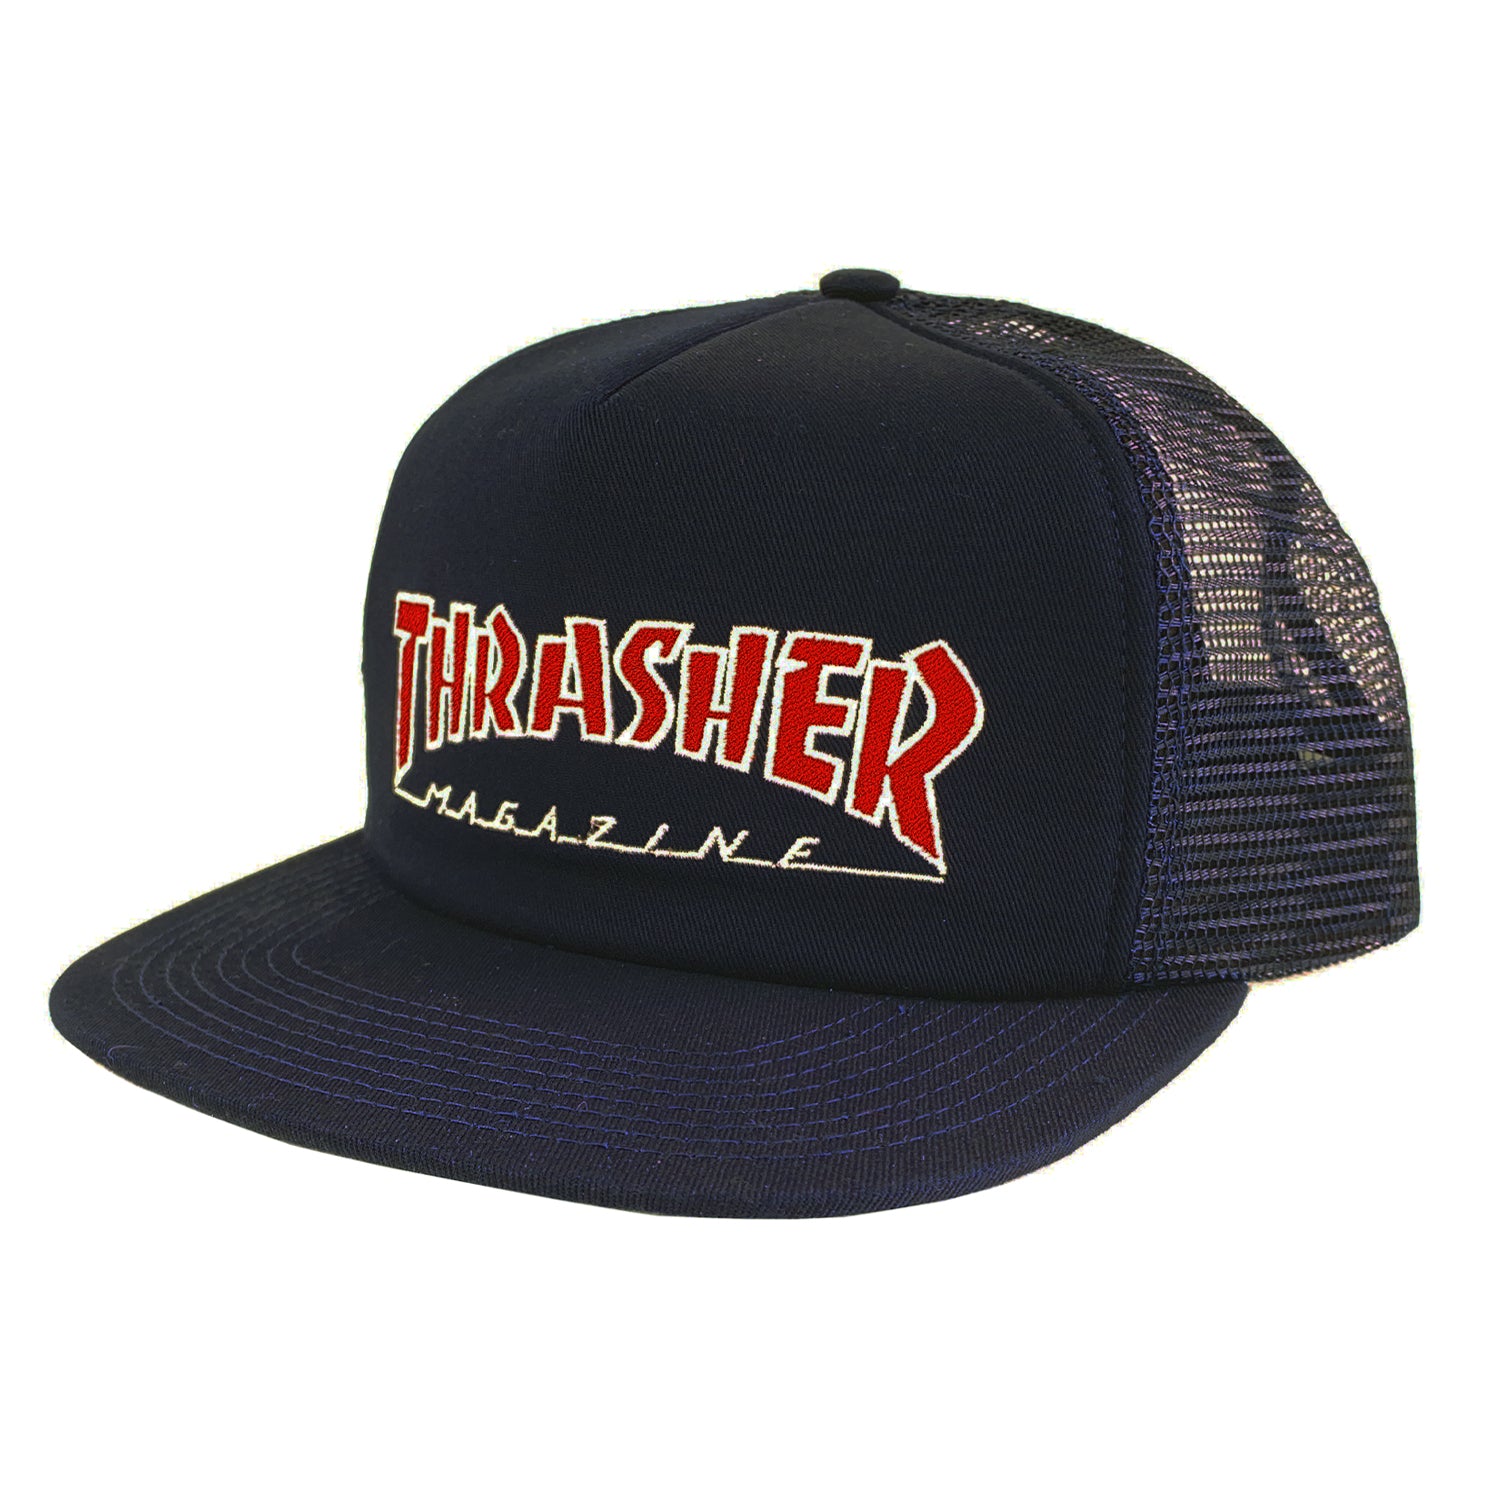 Thrasher Outline Embroidered Mesh Cap - Navy - Prime Delux Store